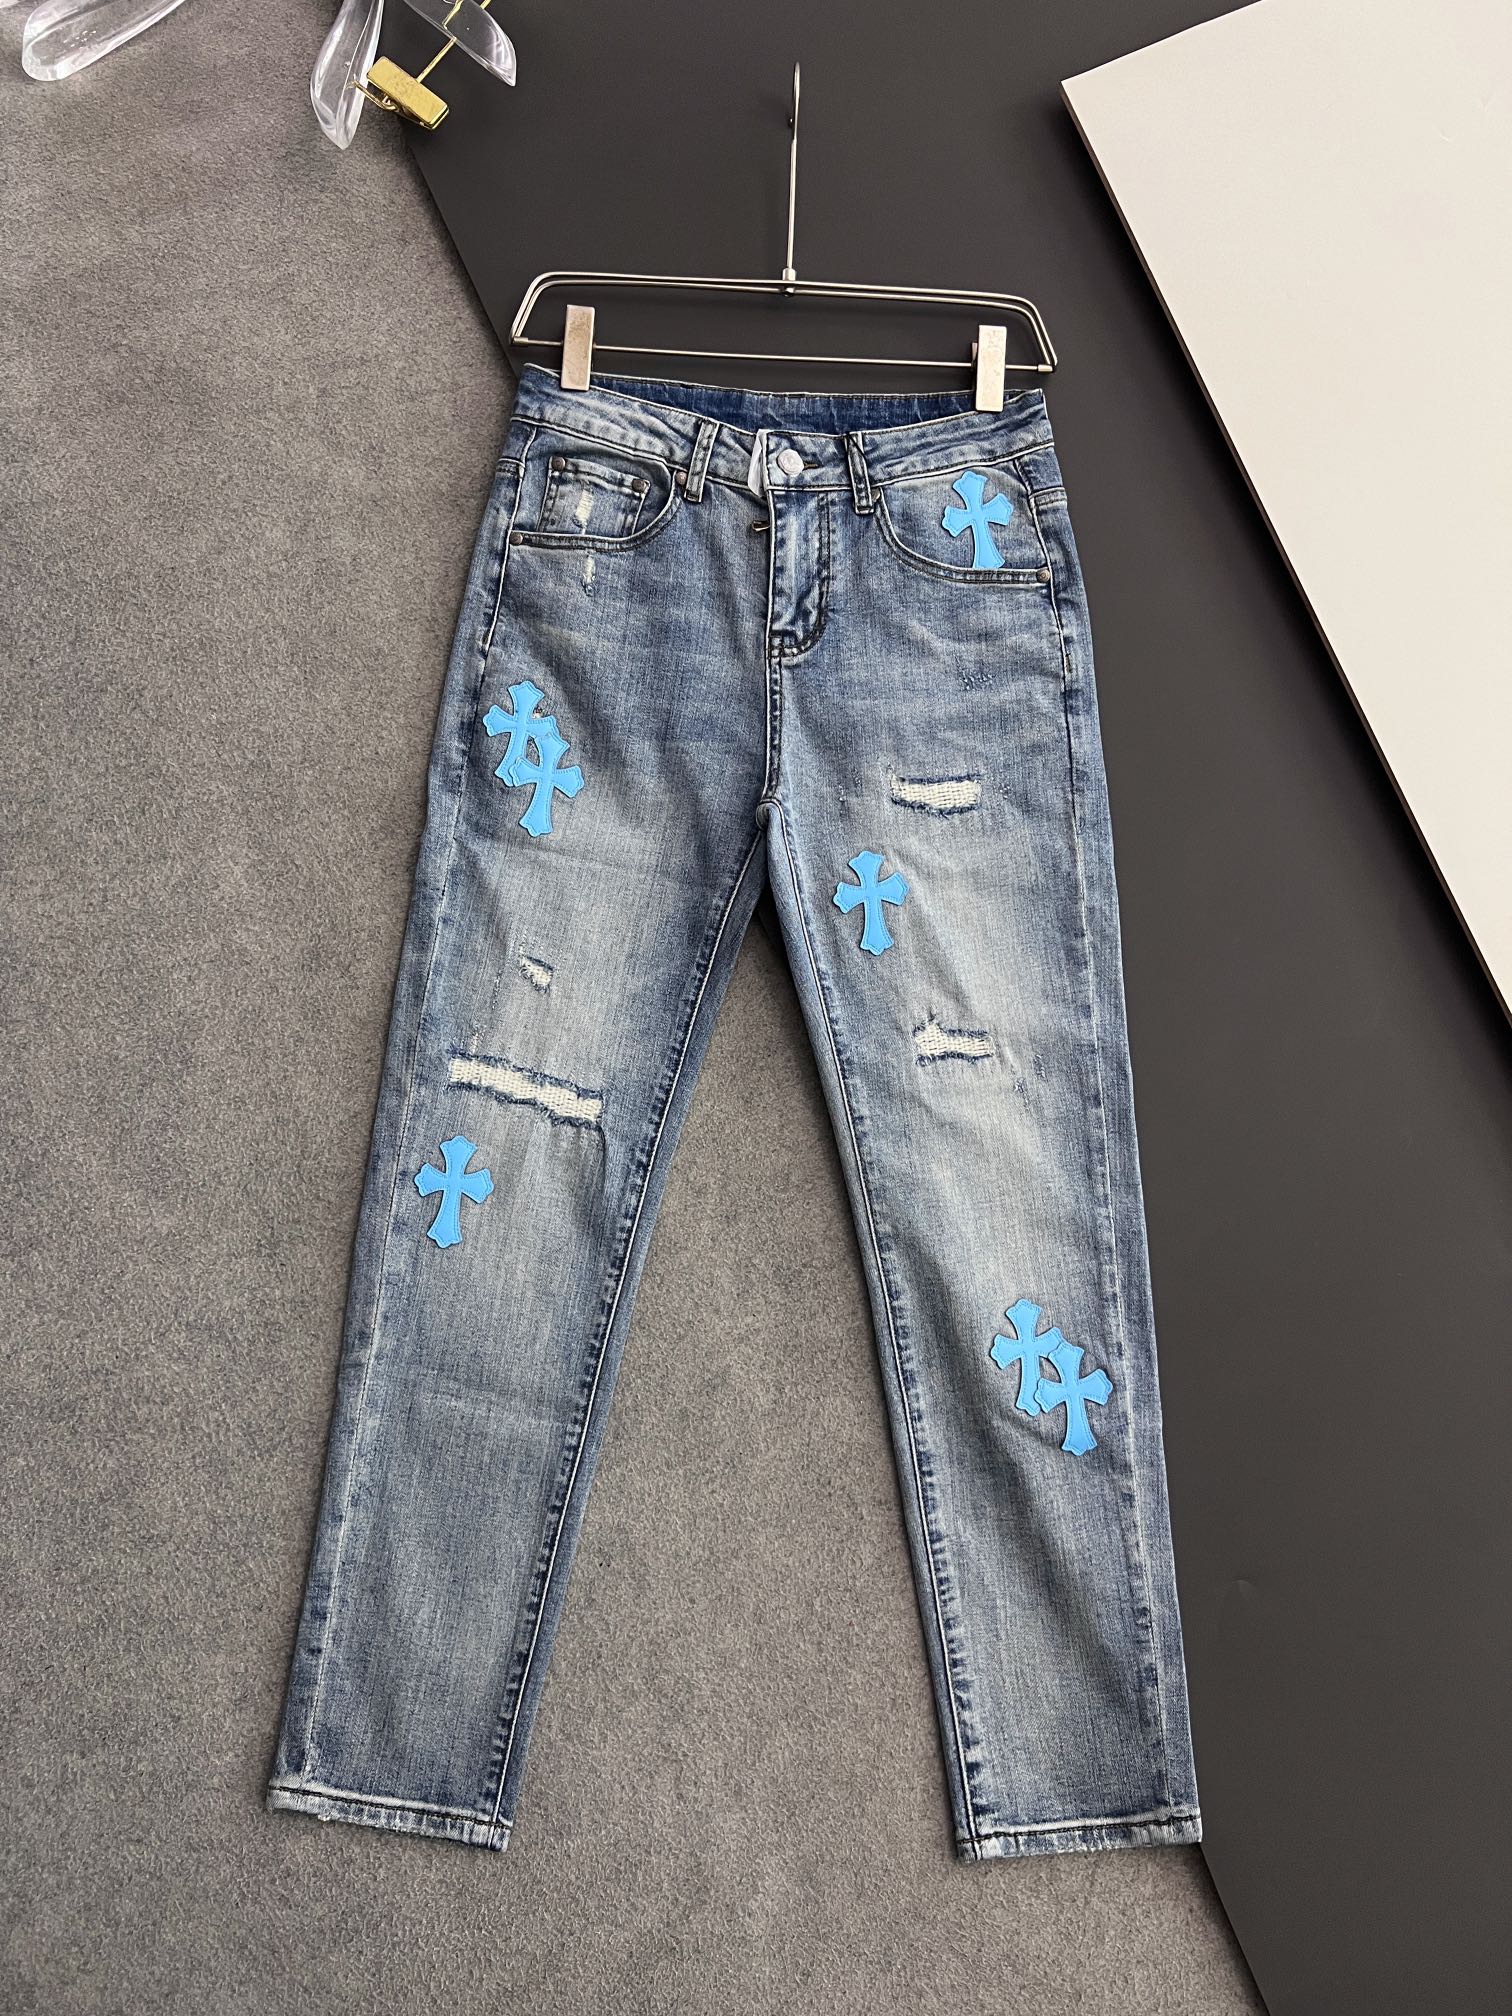 Chrome Hearts Clothing Jeans Casual